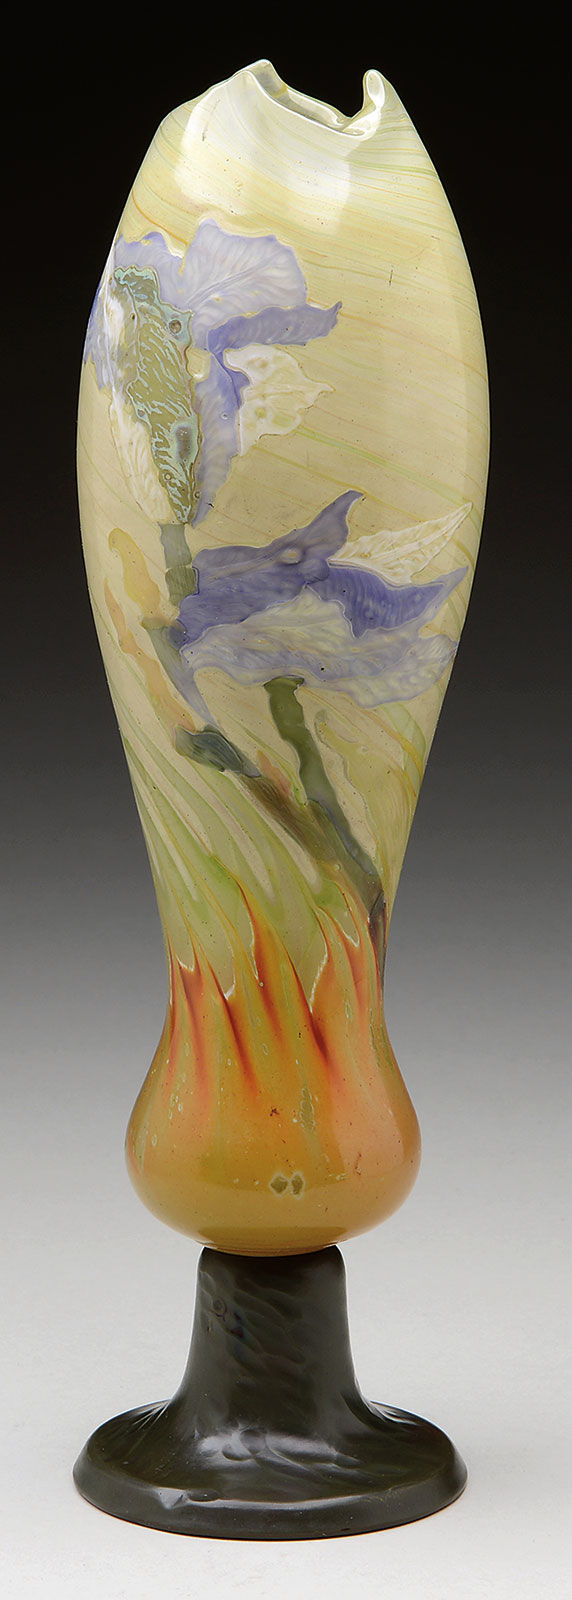 Galle Marquetry Vase From The Jackson Collection